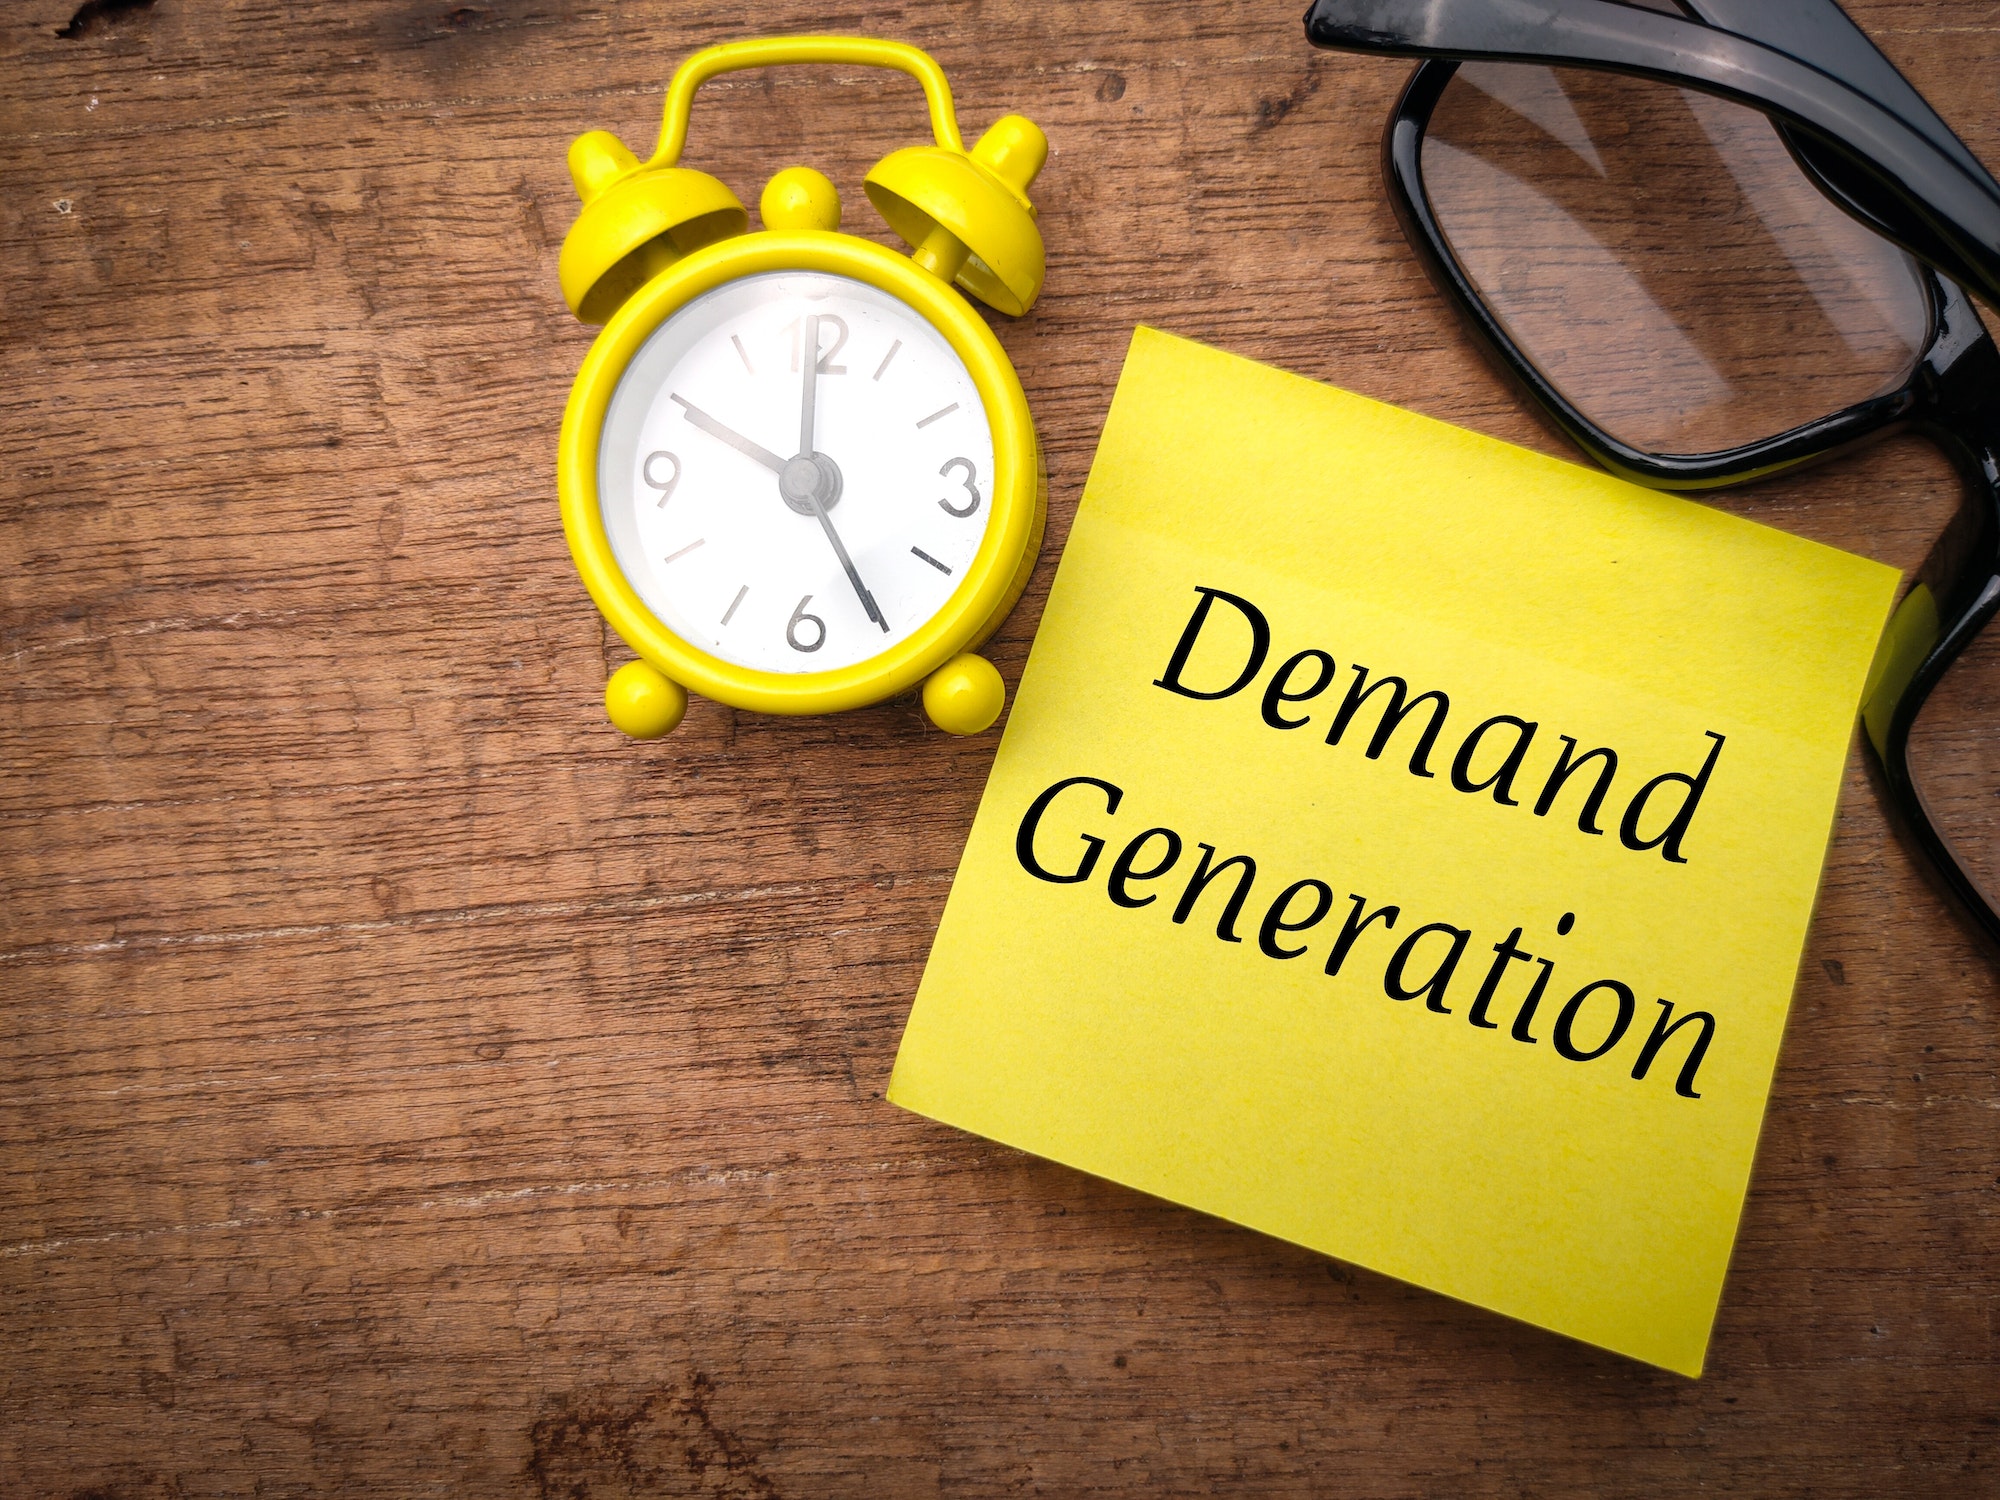 Glasses and alarm clock with the word Demand Generation